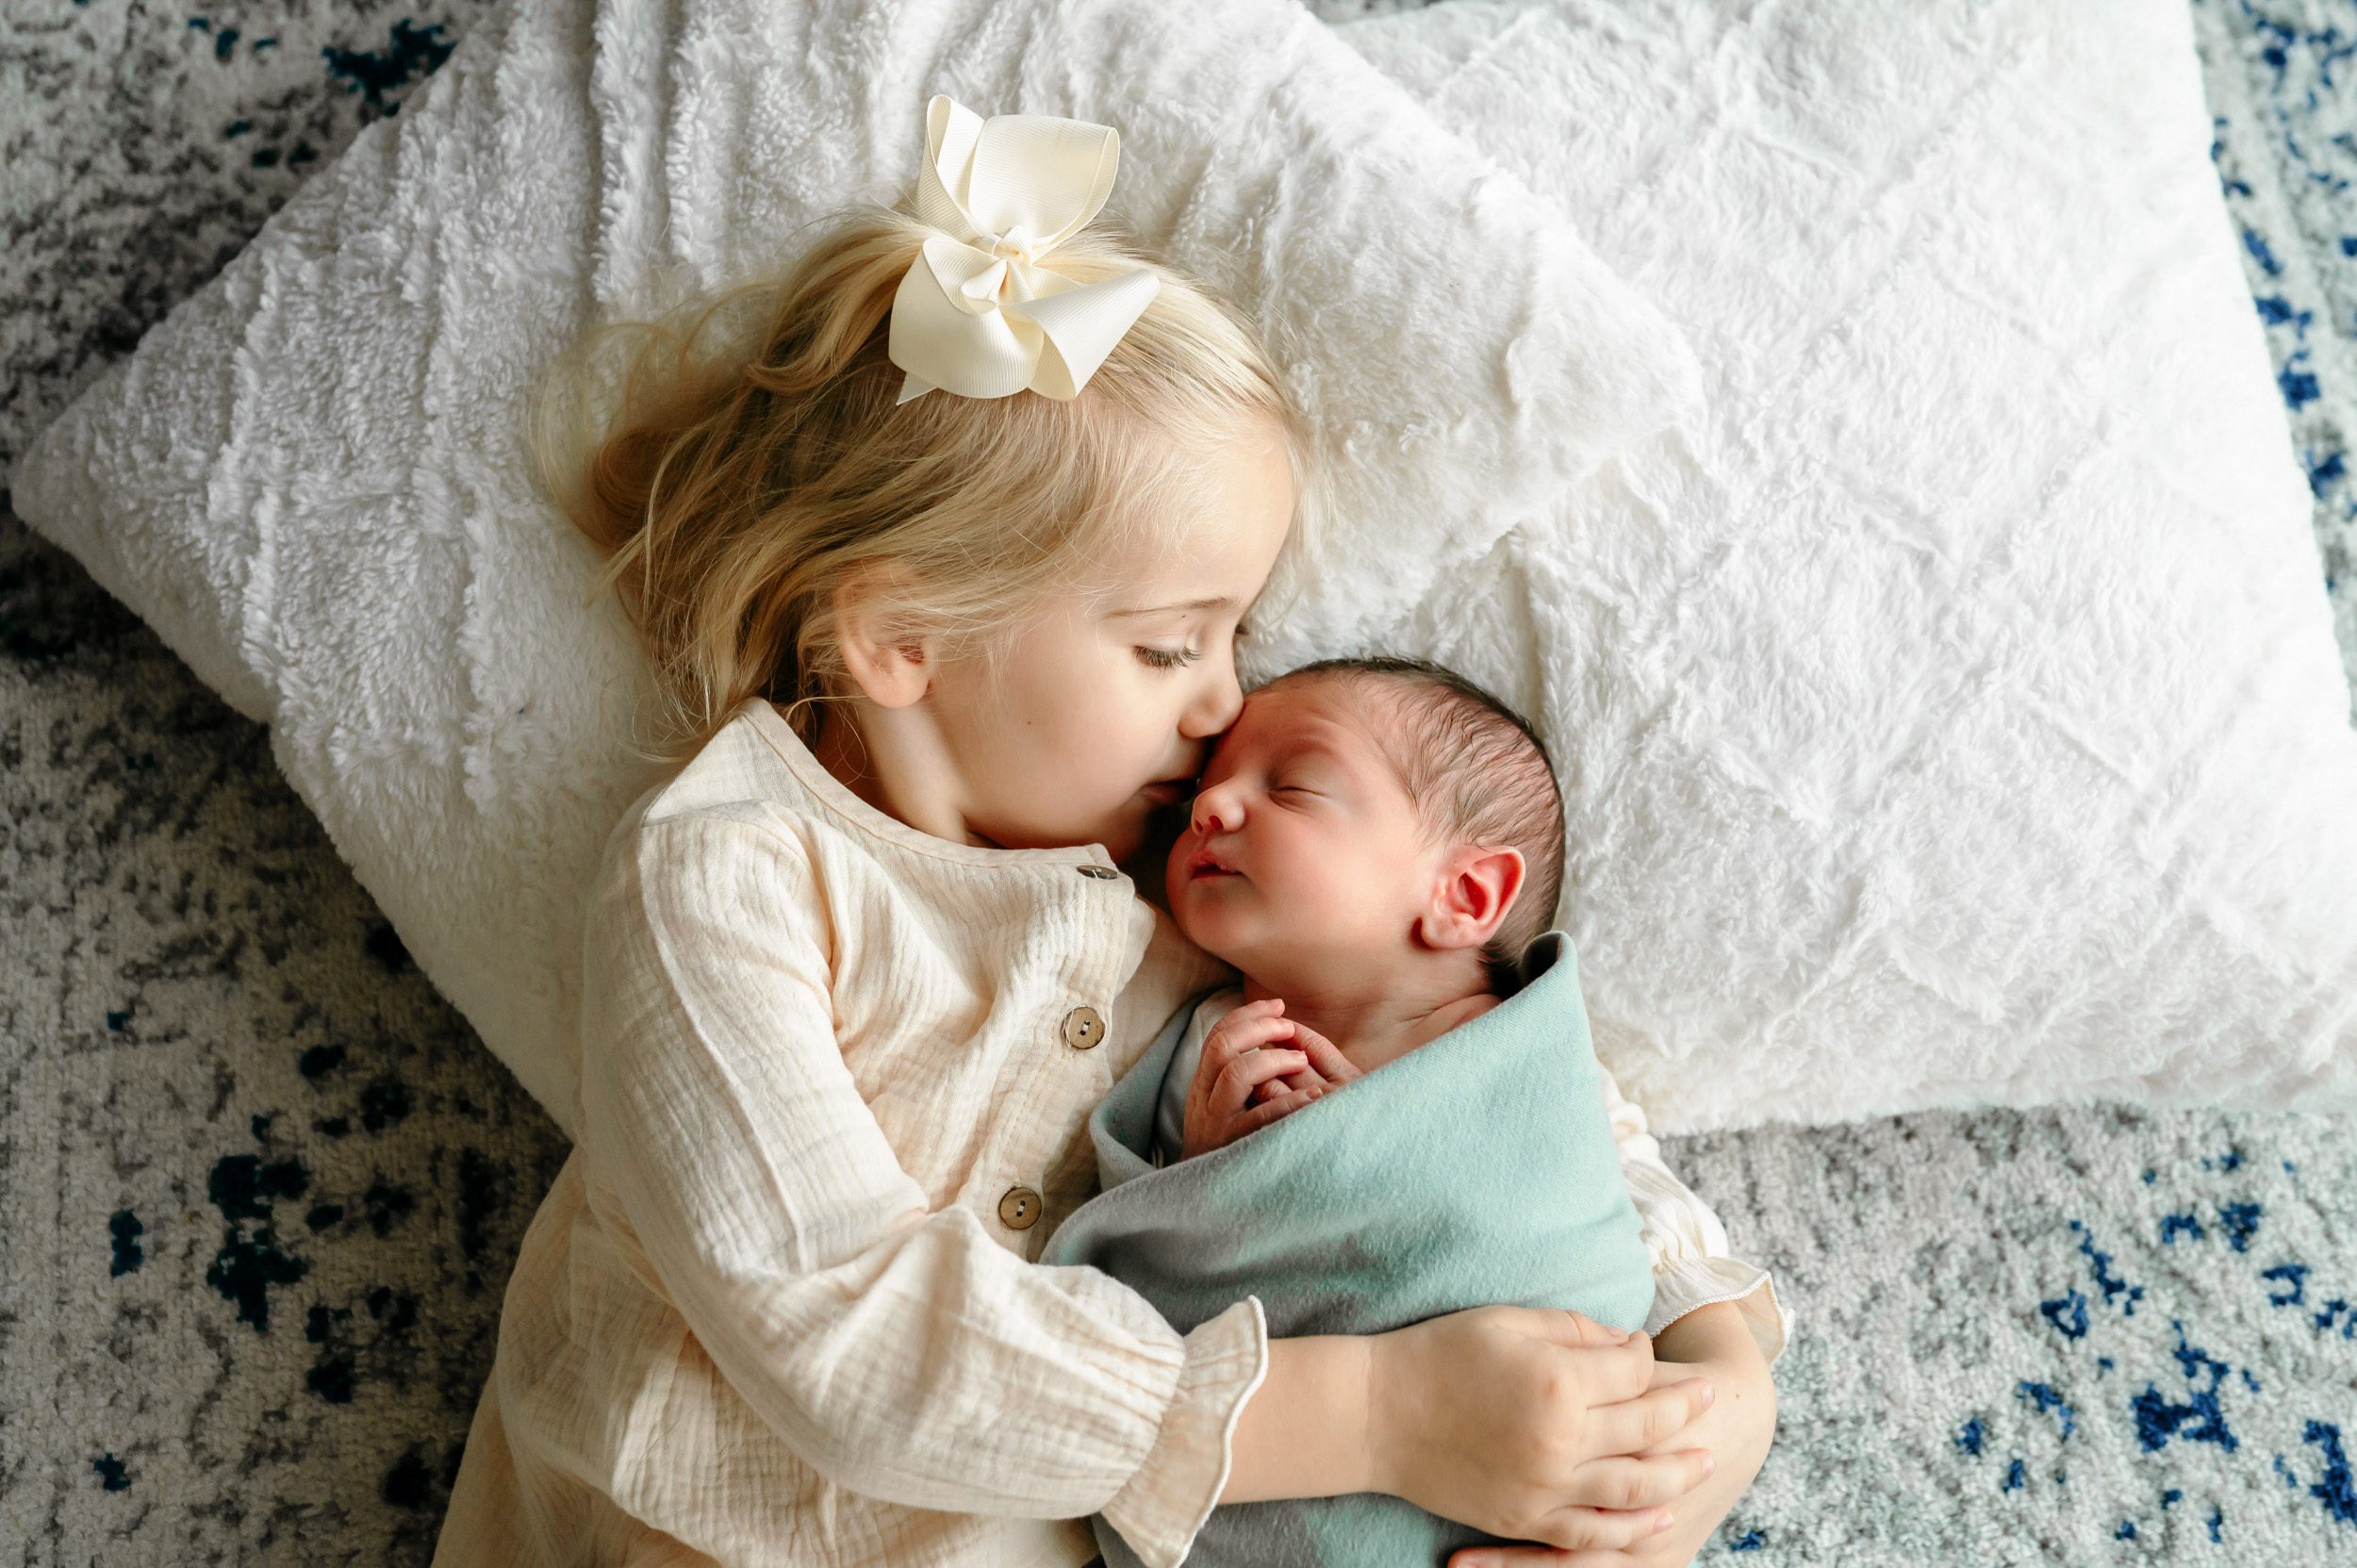 Older sister laying on pillows kissing her newborn baby brother on the forehead at a natural newborn photo session